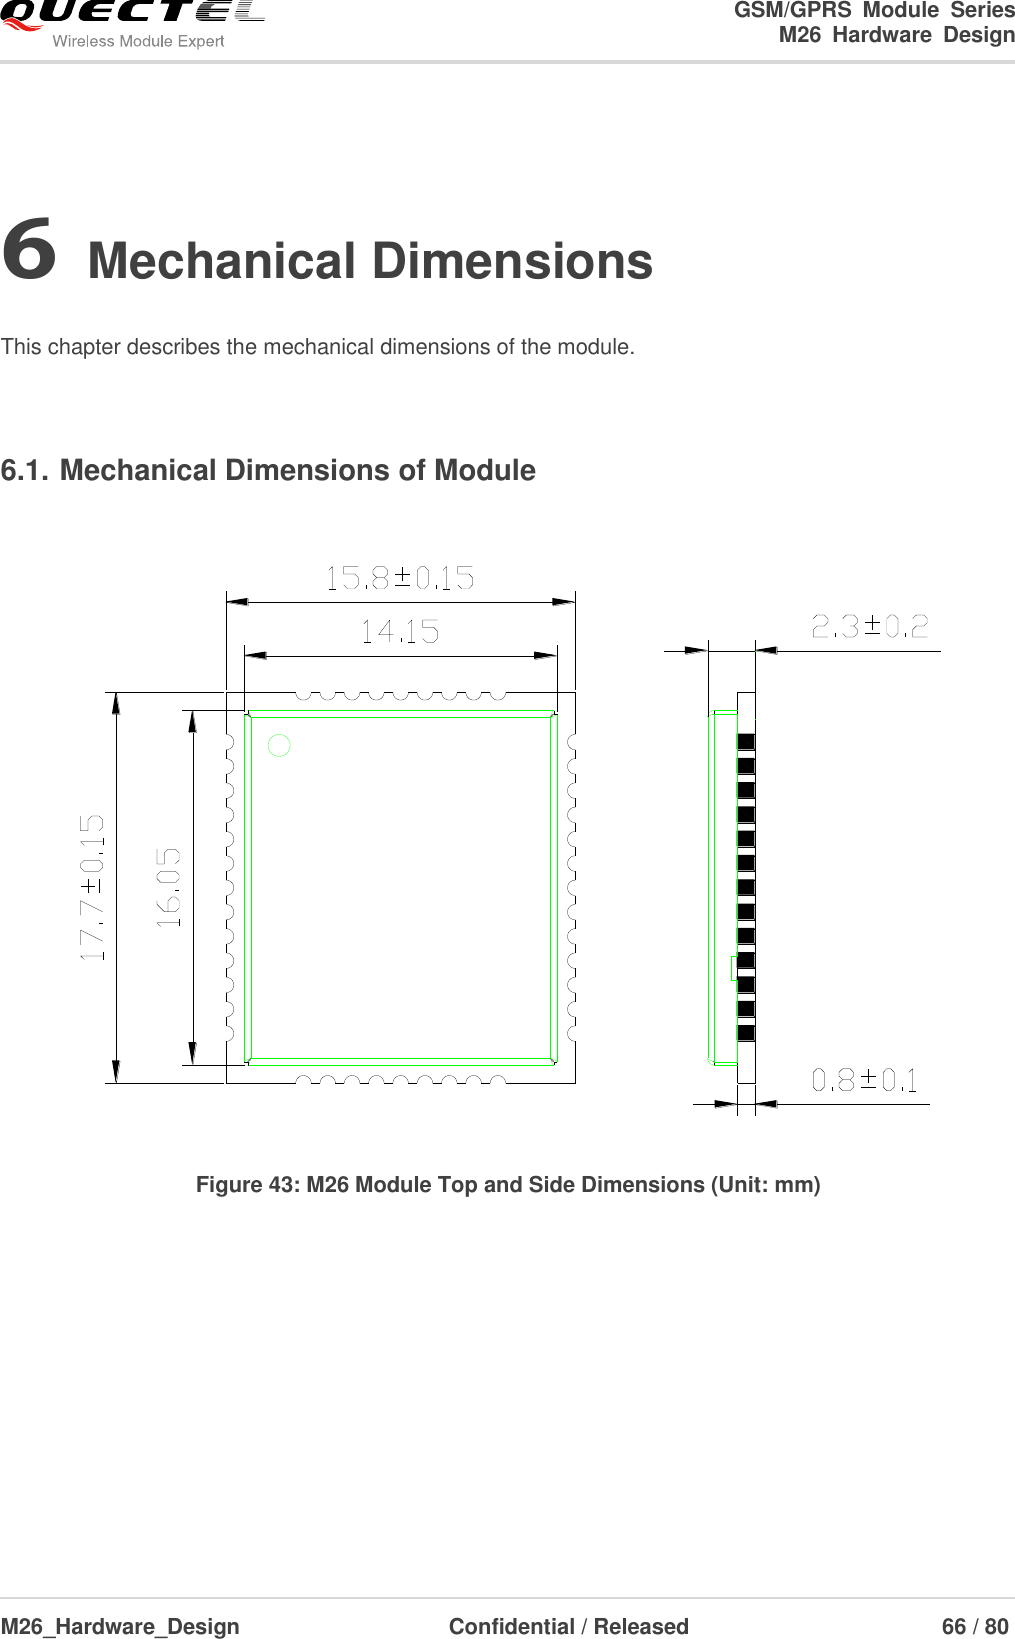                                                                        GSM/GPRS  Module  Series                                                                 M26  Hardware  Design  M26_Hardware_Design                     Confidential / Released                              66 / 80      6 Mechanical Dimensions  This chapter describes the mechanical dimensions of the module.  6.1. Mechanical Dimensions of Module   Figure 43: M26 Module Top and Side Dimensions (Unit: mm)  